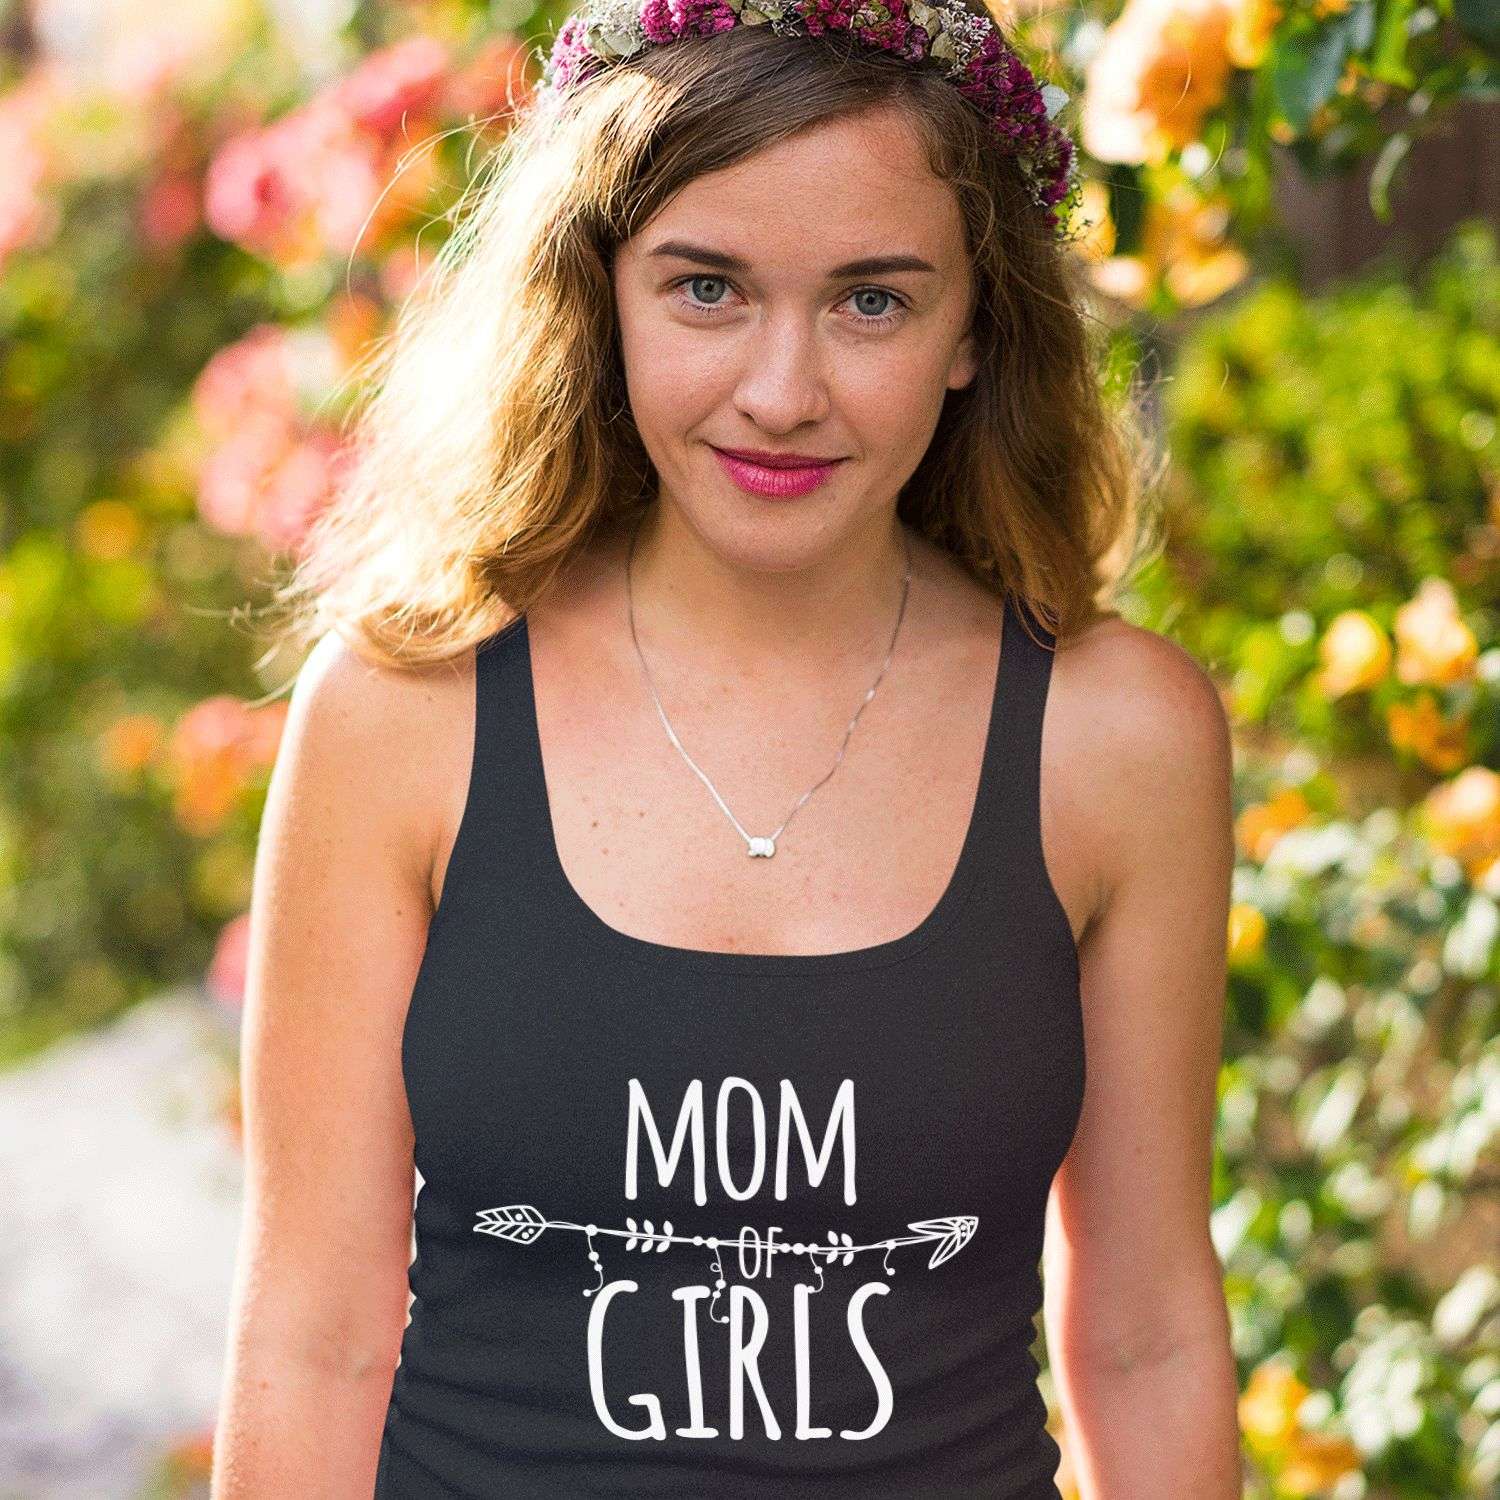 A Shirt for Mommy Tank Top